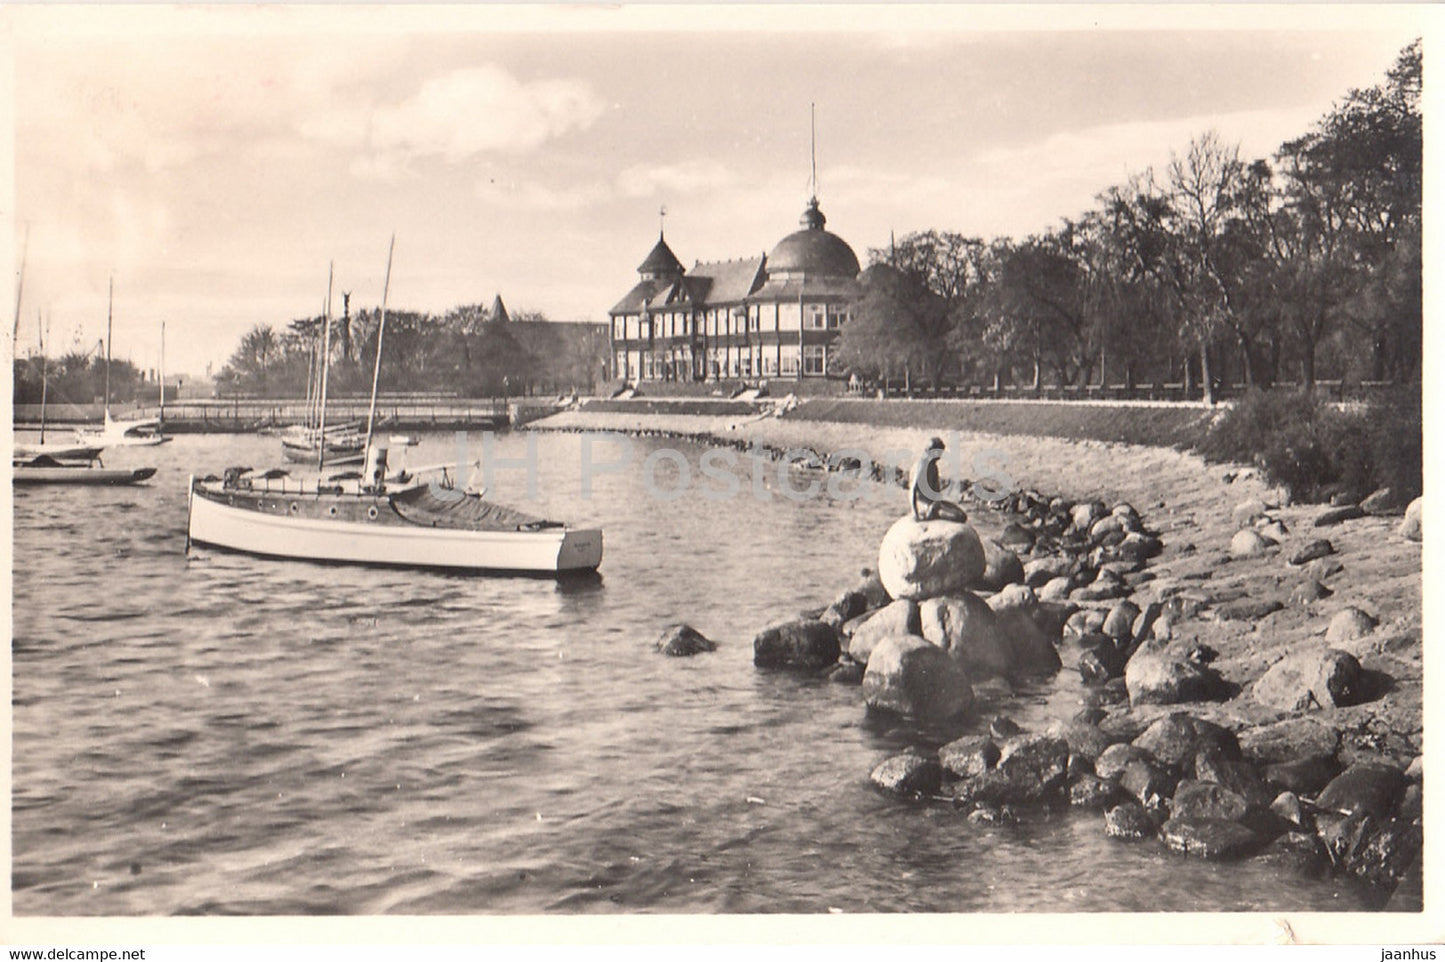 Copenhagen - The Yacht Pavilion and the little Sea Nymph Langelinie - boat - old postcard - 1938 - Denmark - used - JH Postcards